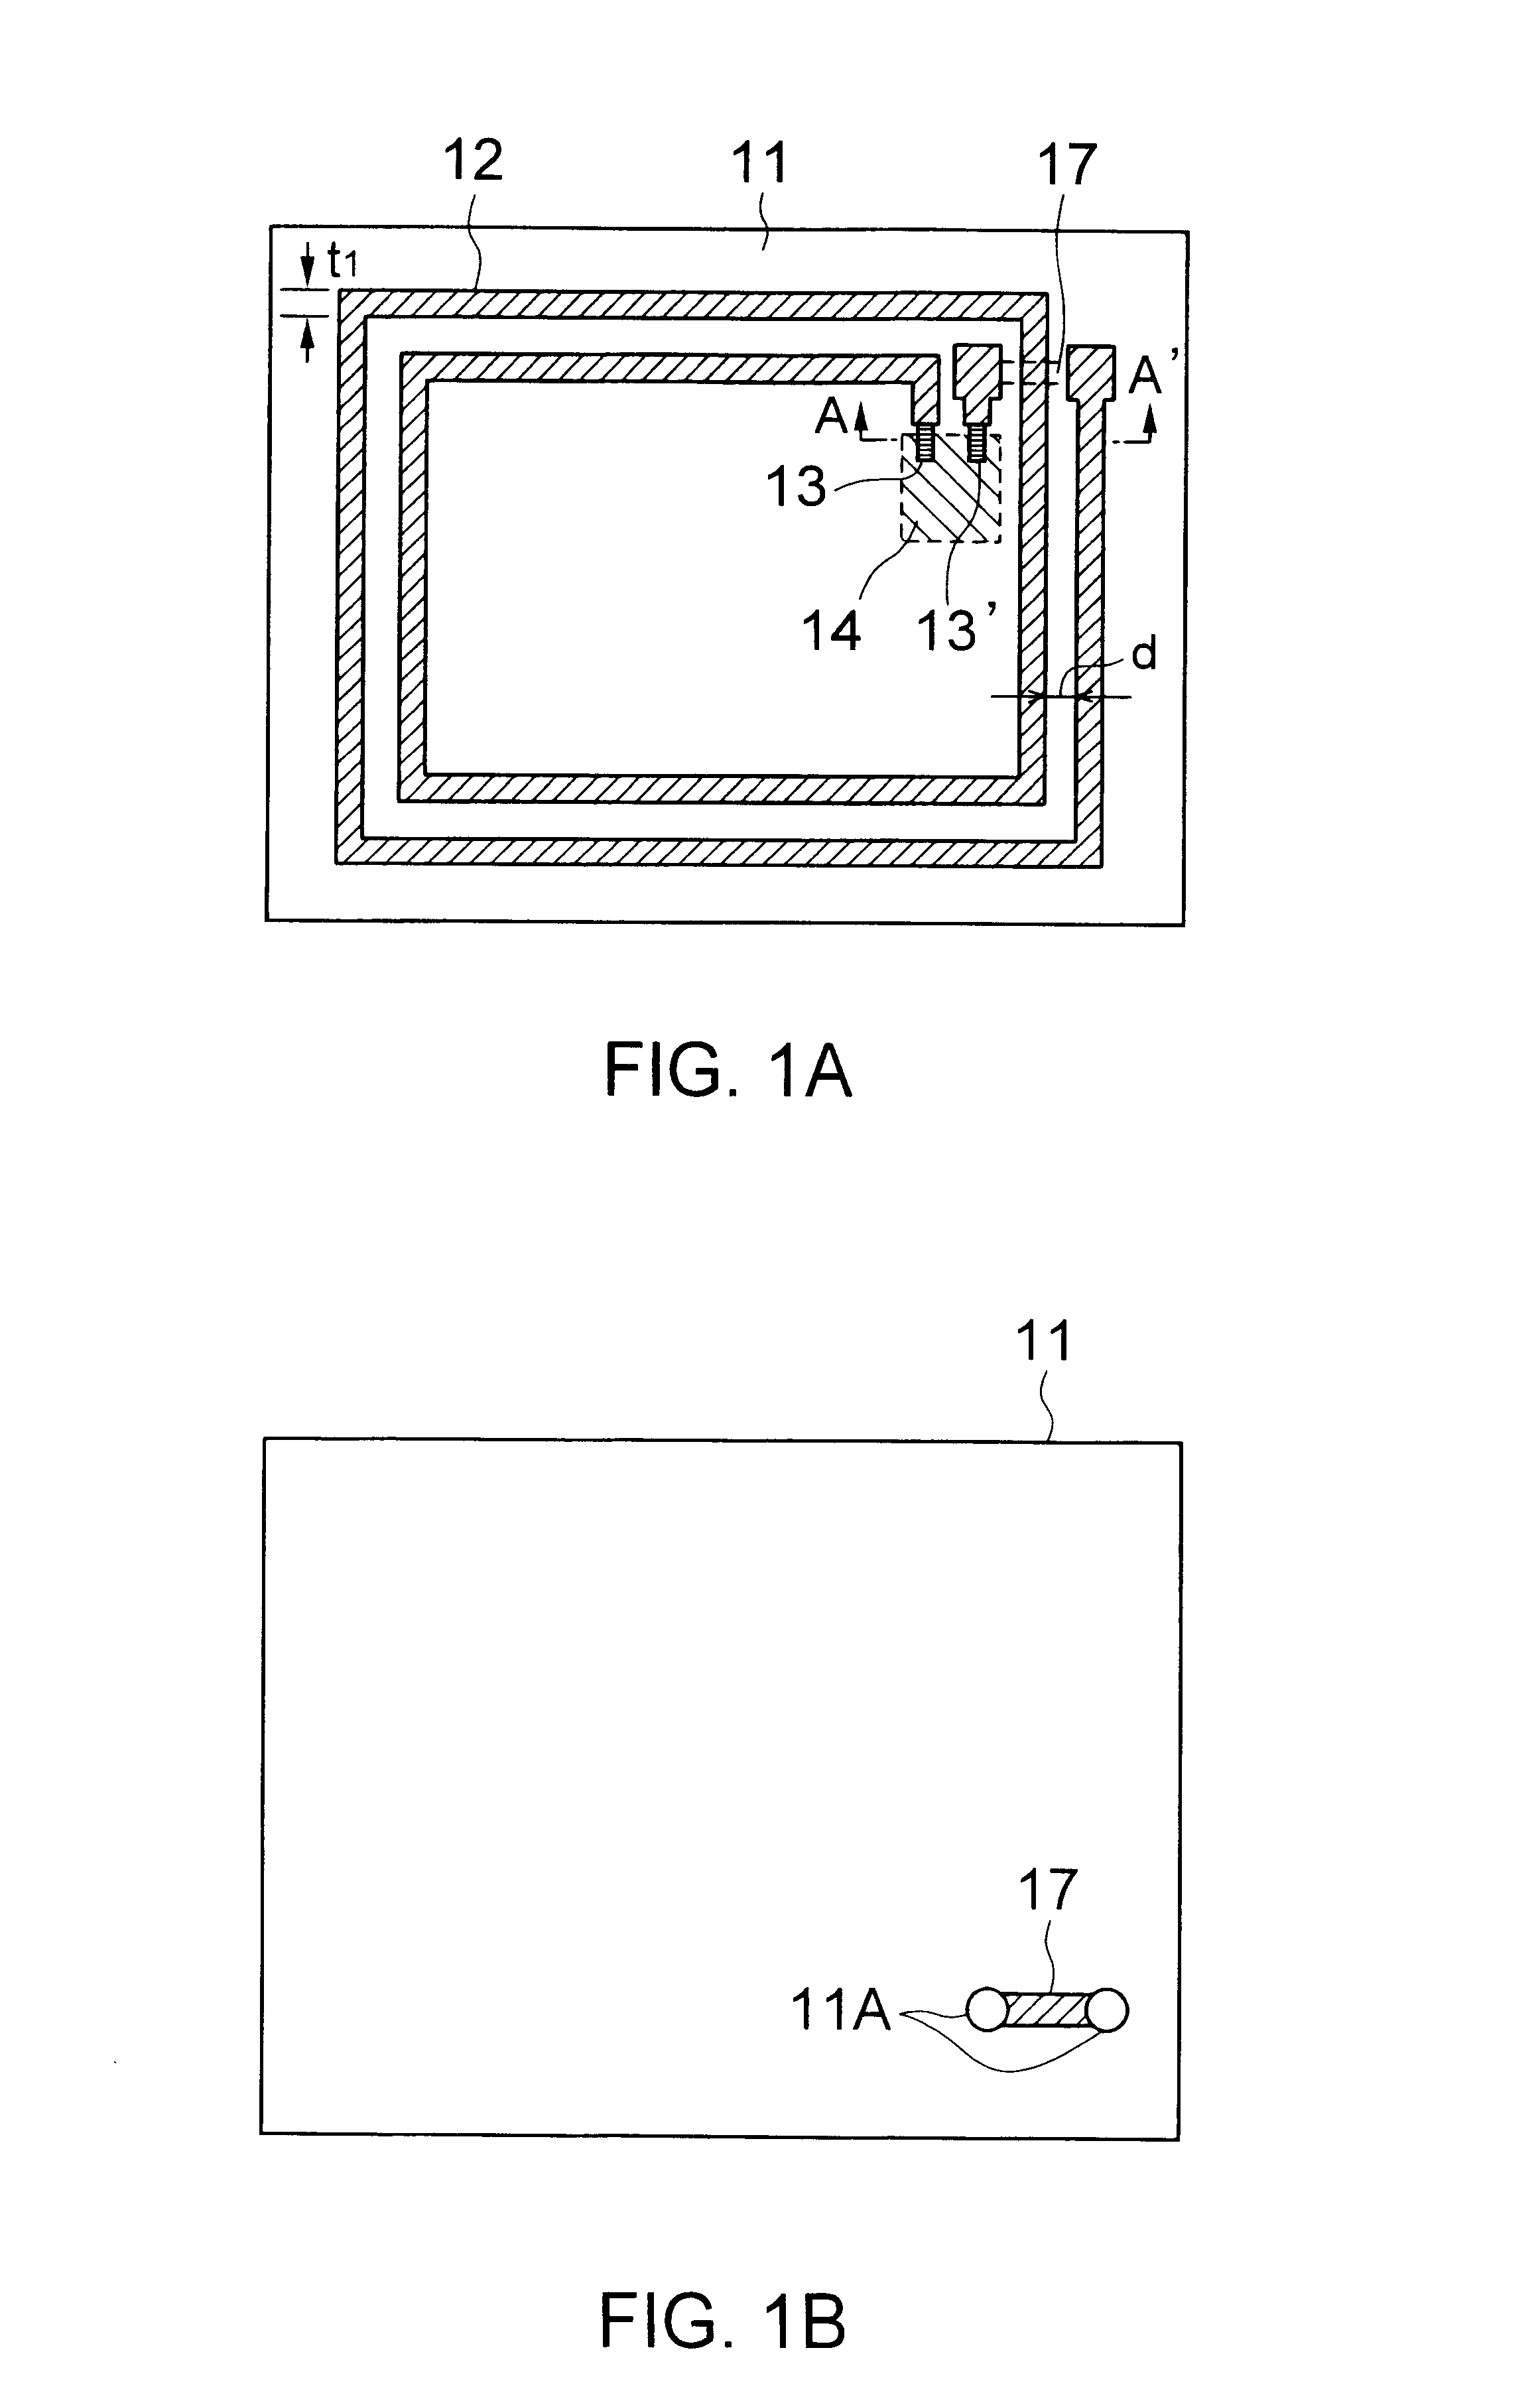 Non-contact IC card and IC card communication system